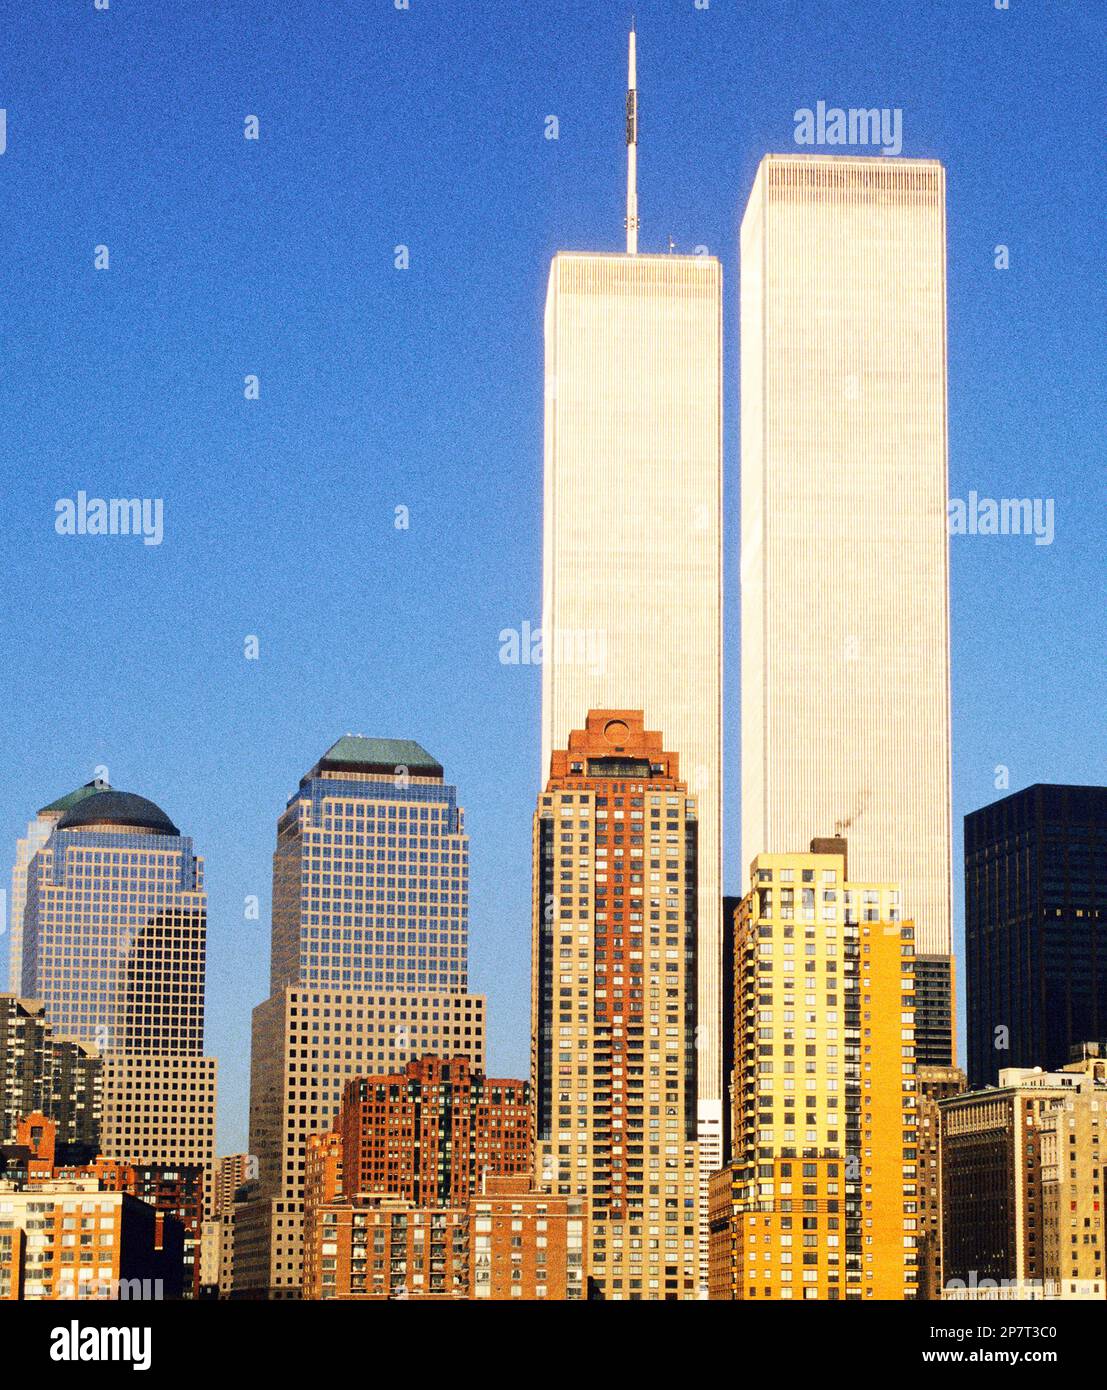 World Trade Center Twin Towers before 9/11 New York City USA before 2001. Financial Center skyline in downtown Lower Manhattan Stock Photo